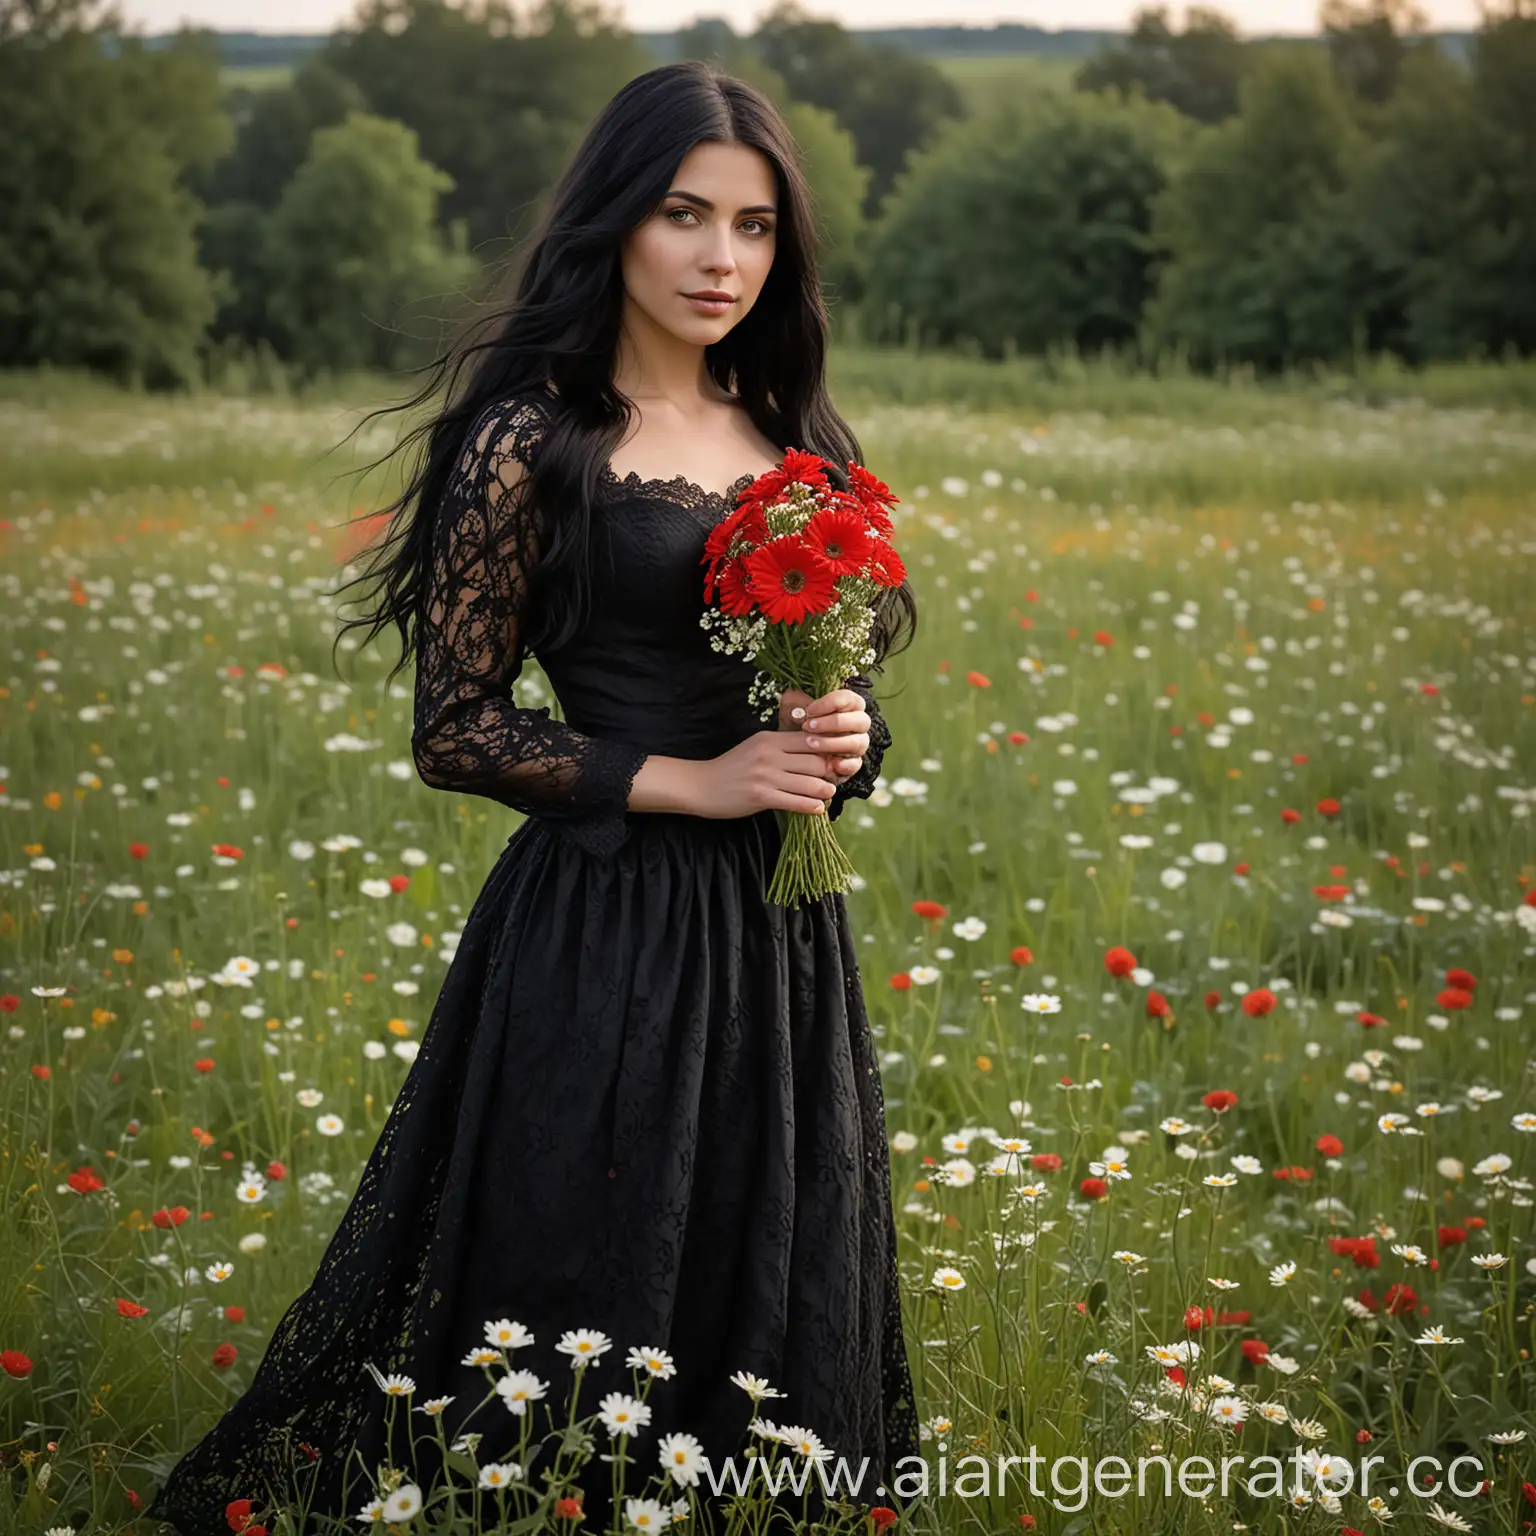 Elegant-Woman-in-Black-Lace-Dress-Holding-Daisies-and-Candle-in-Field